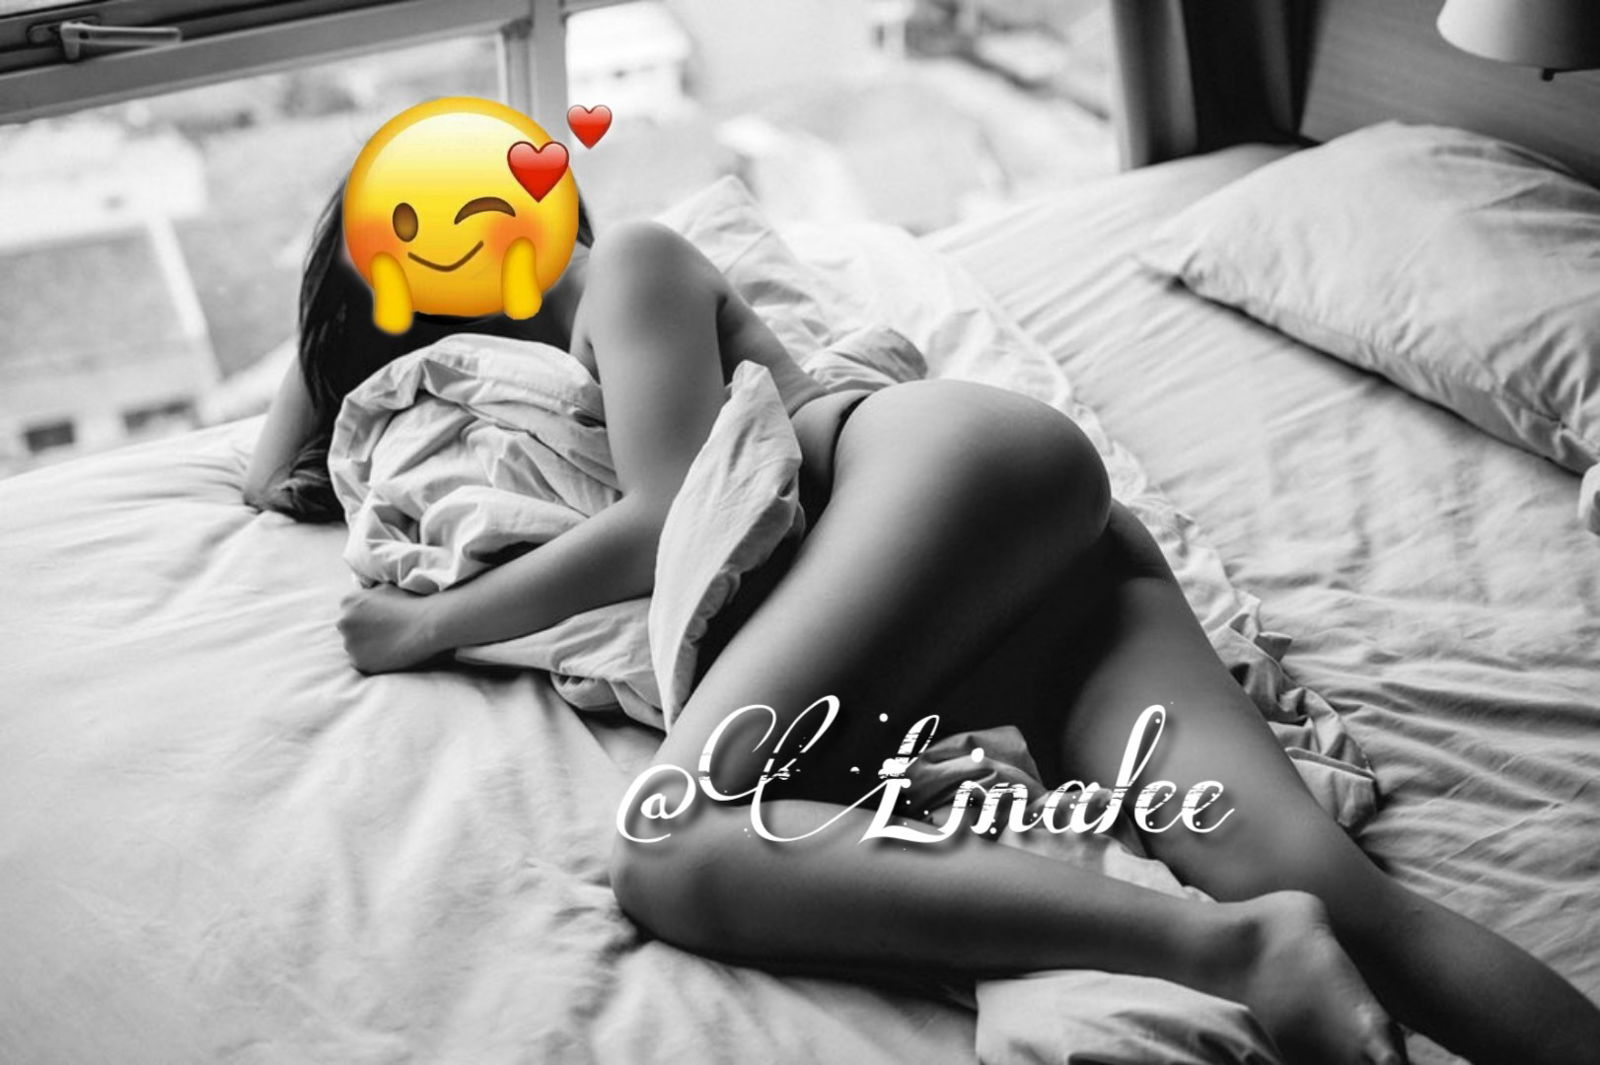 Photo by Linalee with the username @Linalee,  July 4, 2020 at 11:07 AM. The post is about the topic Amateurs and the text says 'How do I look now? I prefered to open the blinds/curtains beside our bed, so that people could see our 'activity'.
Should I spread my legs? 😉🤭
#melayu #realcouple #tease #malaycouple'